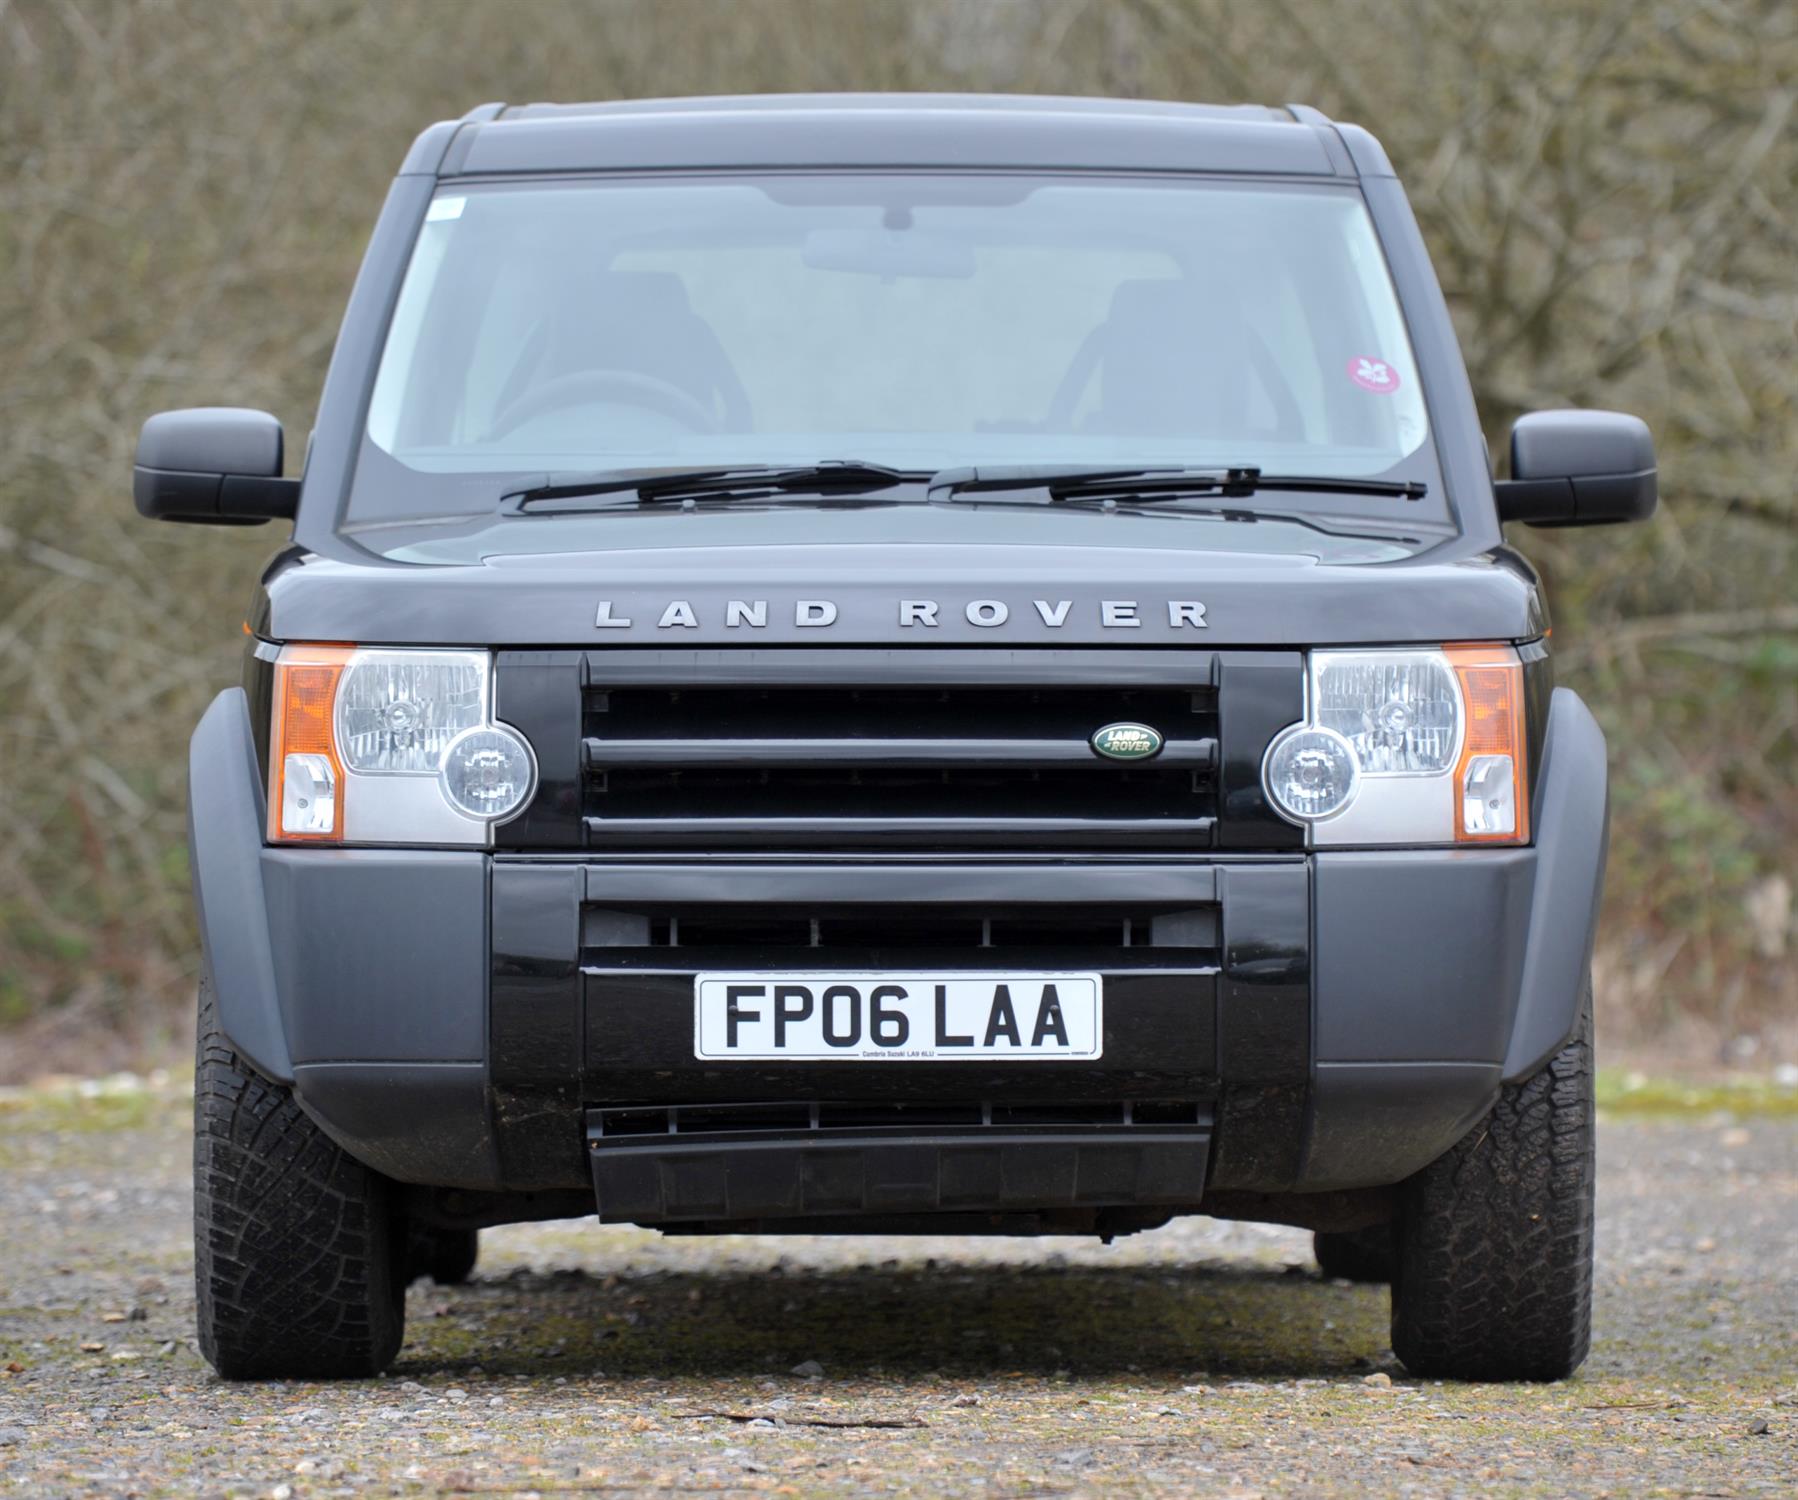 Land Rover Discovery 3 TDV6 Diesel 6 Speed Manual. Registration number: FP06 LAA. Mileage: 125,360. - Image 2 of 12